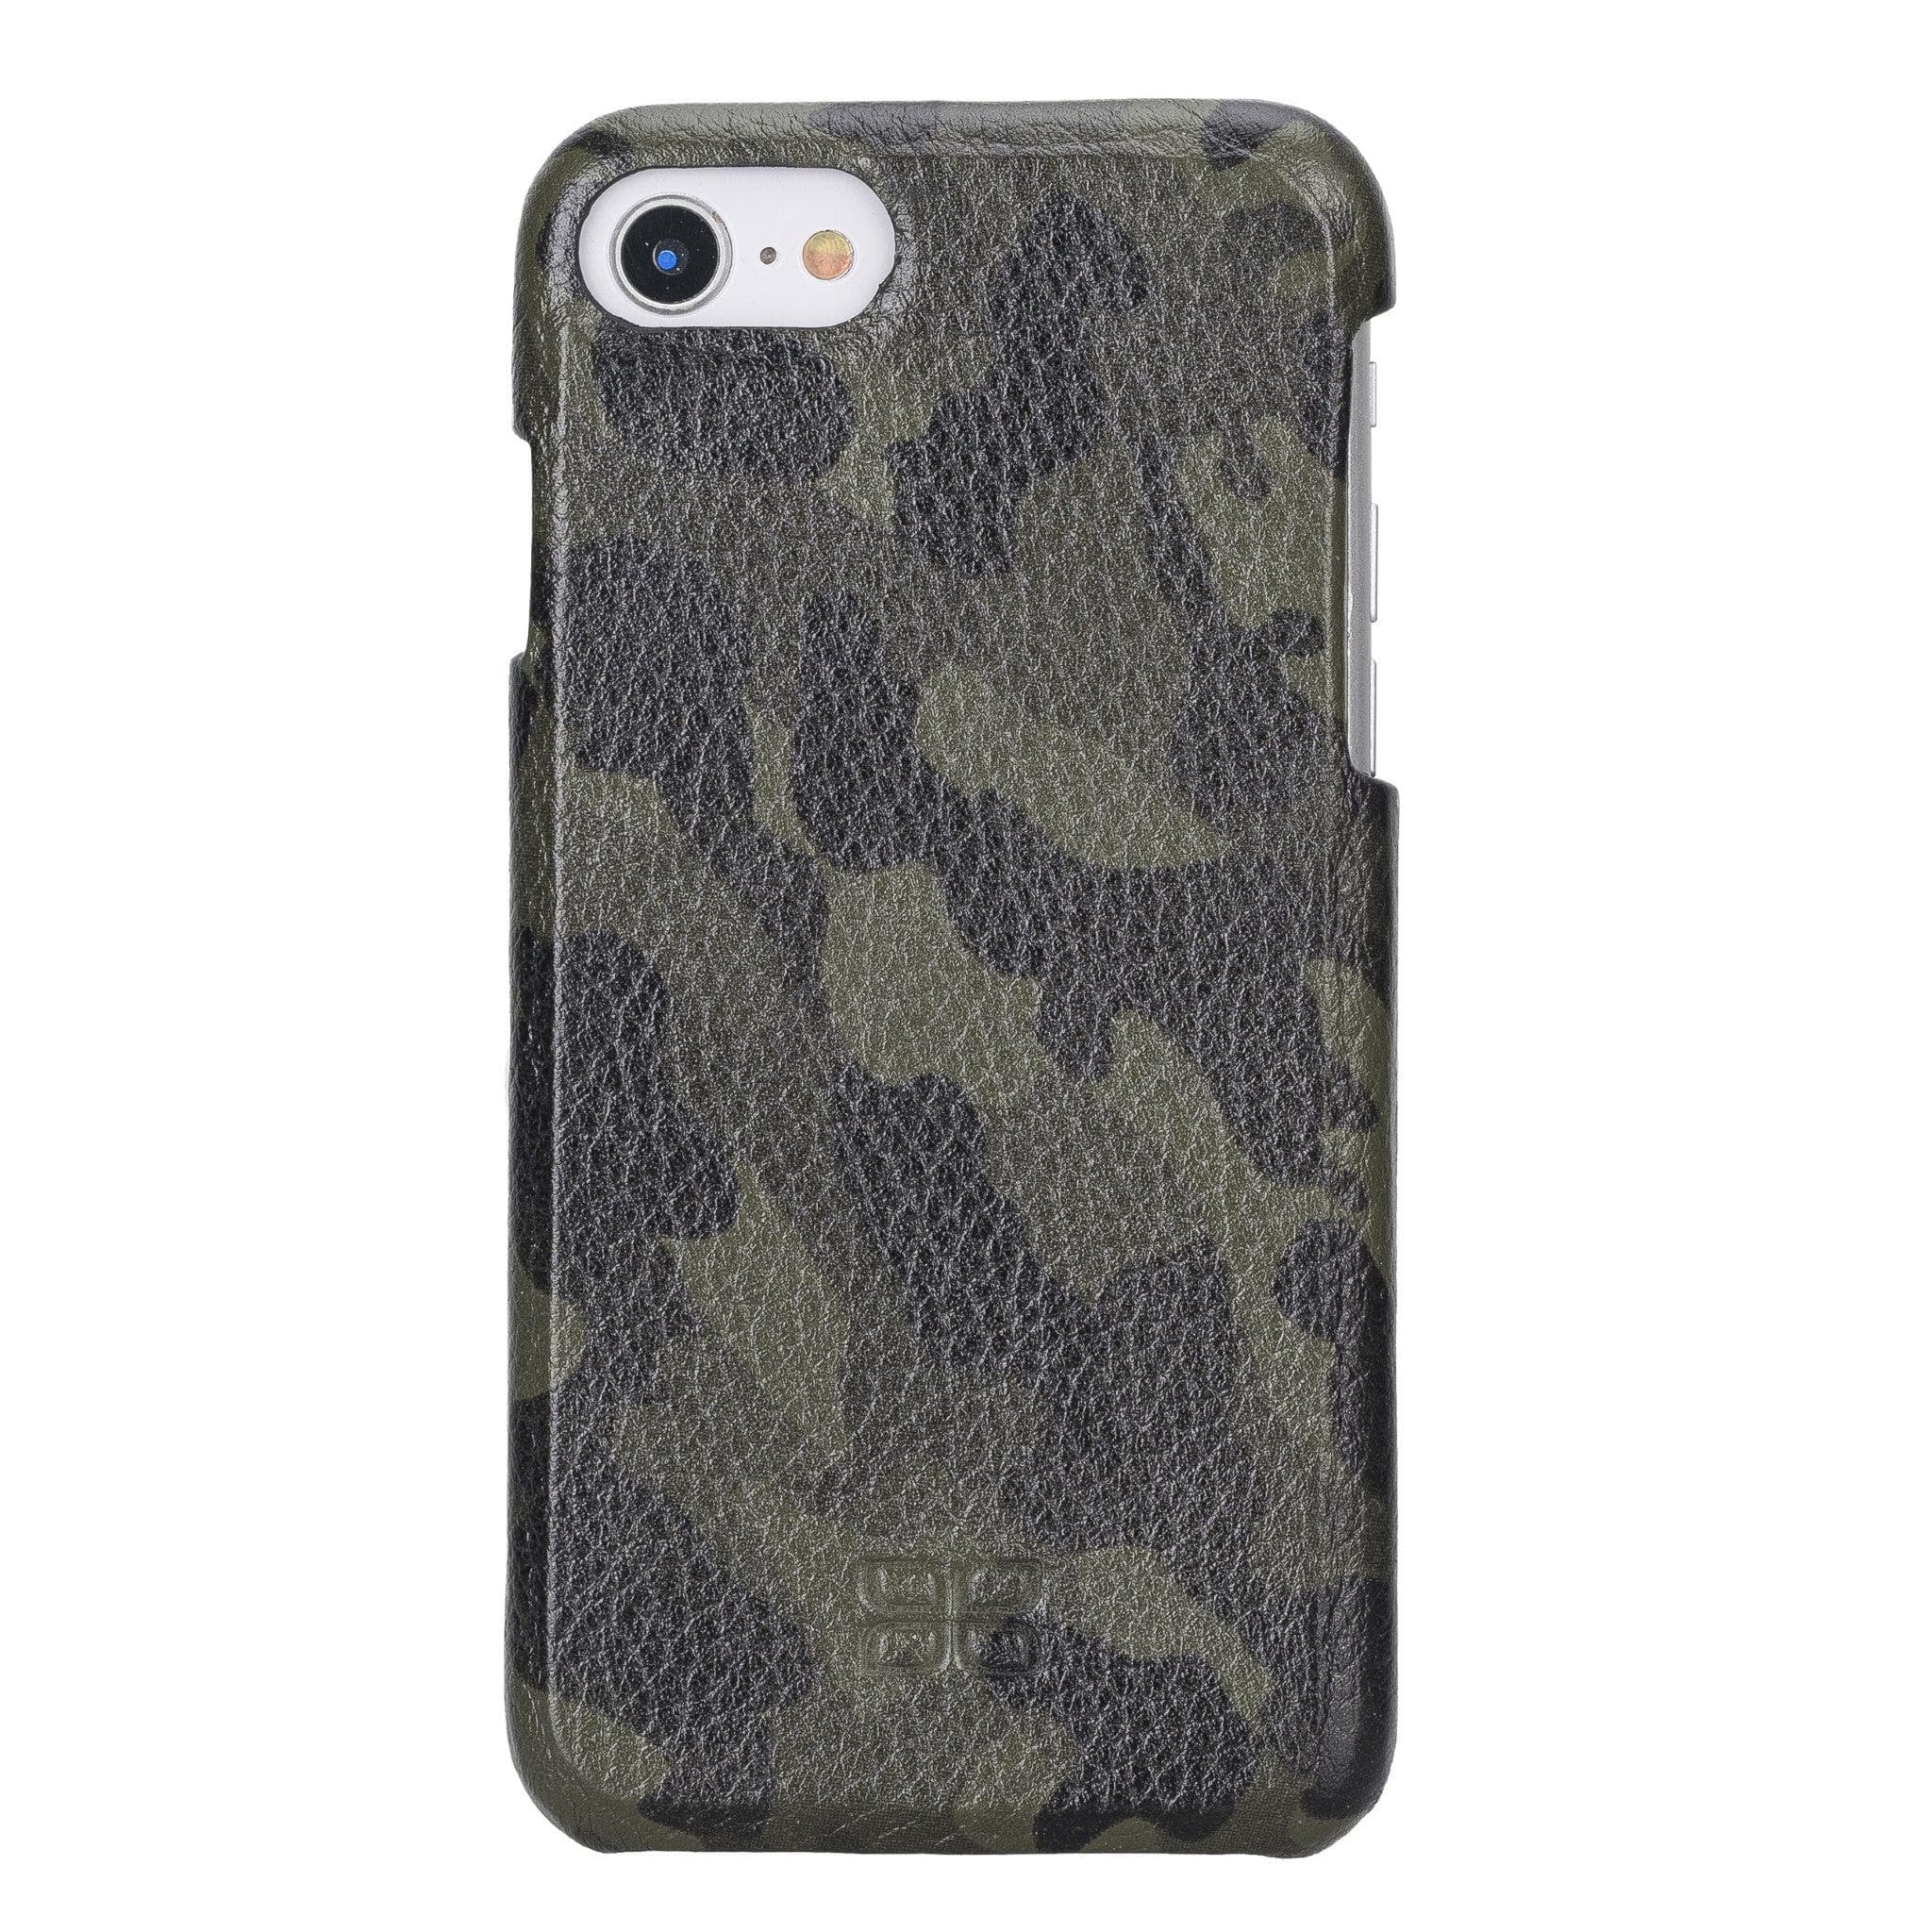 Apple iPhone 7 Series F360 Leather Back Cover Case iPhone 7 / Camouflage Bouletta LTD